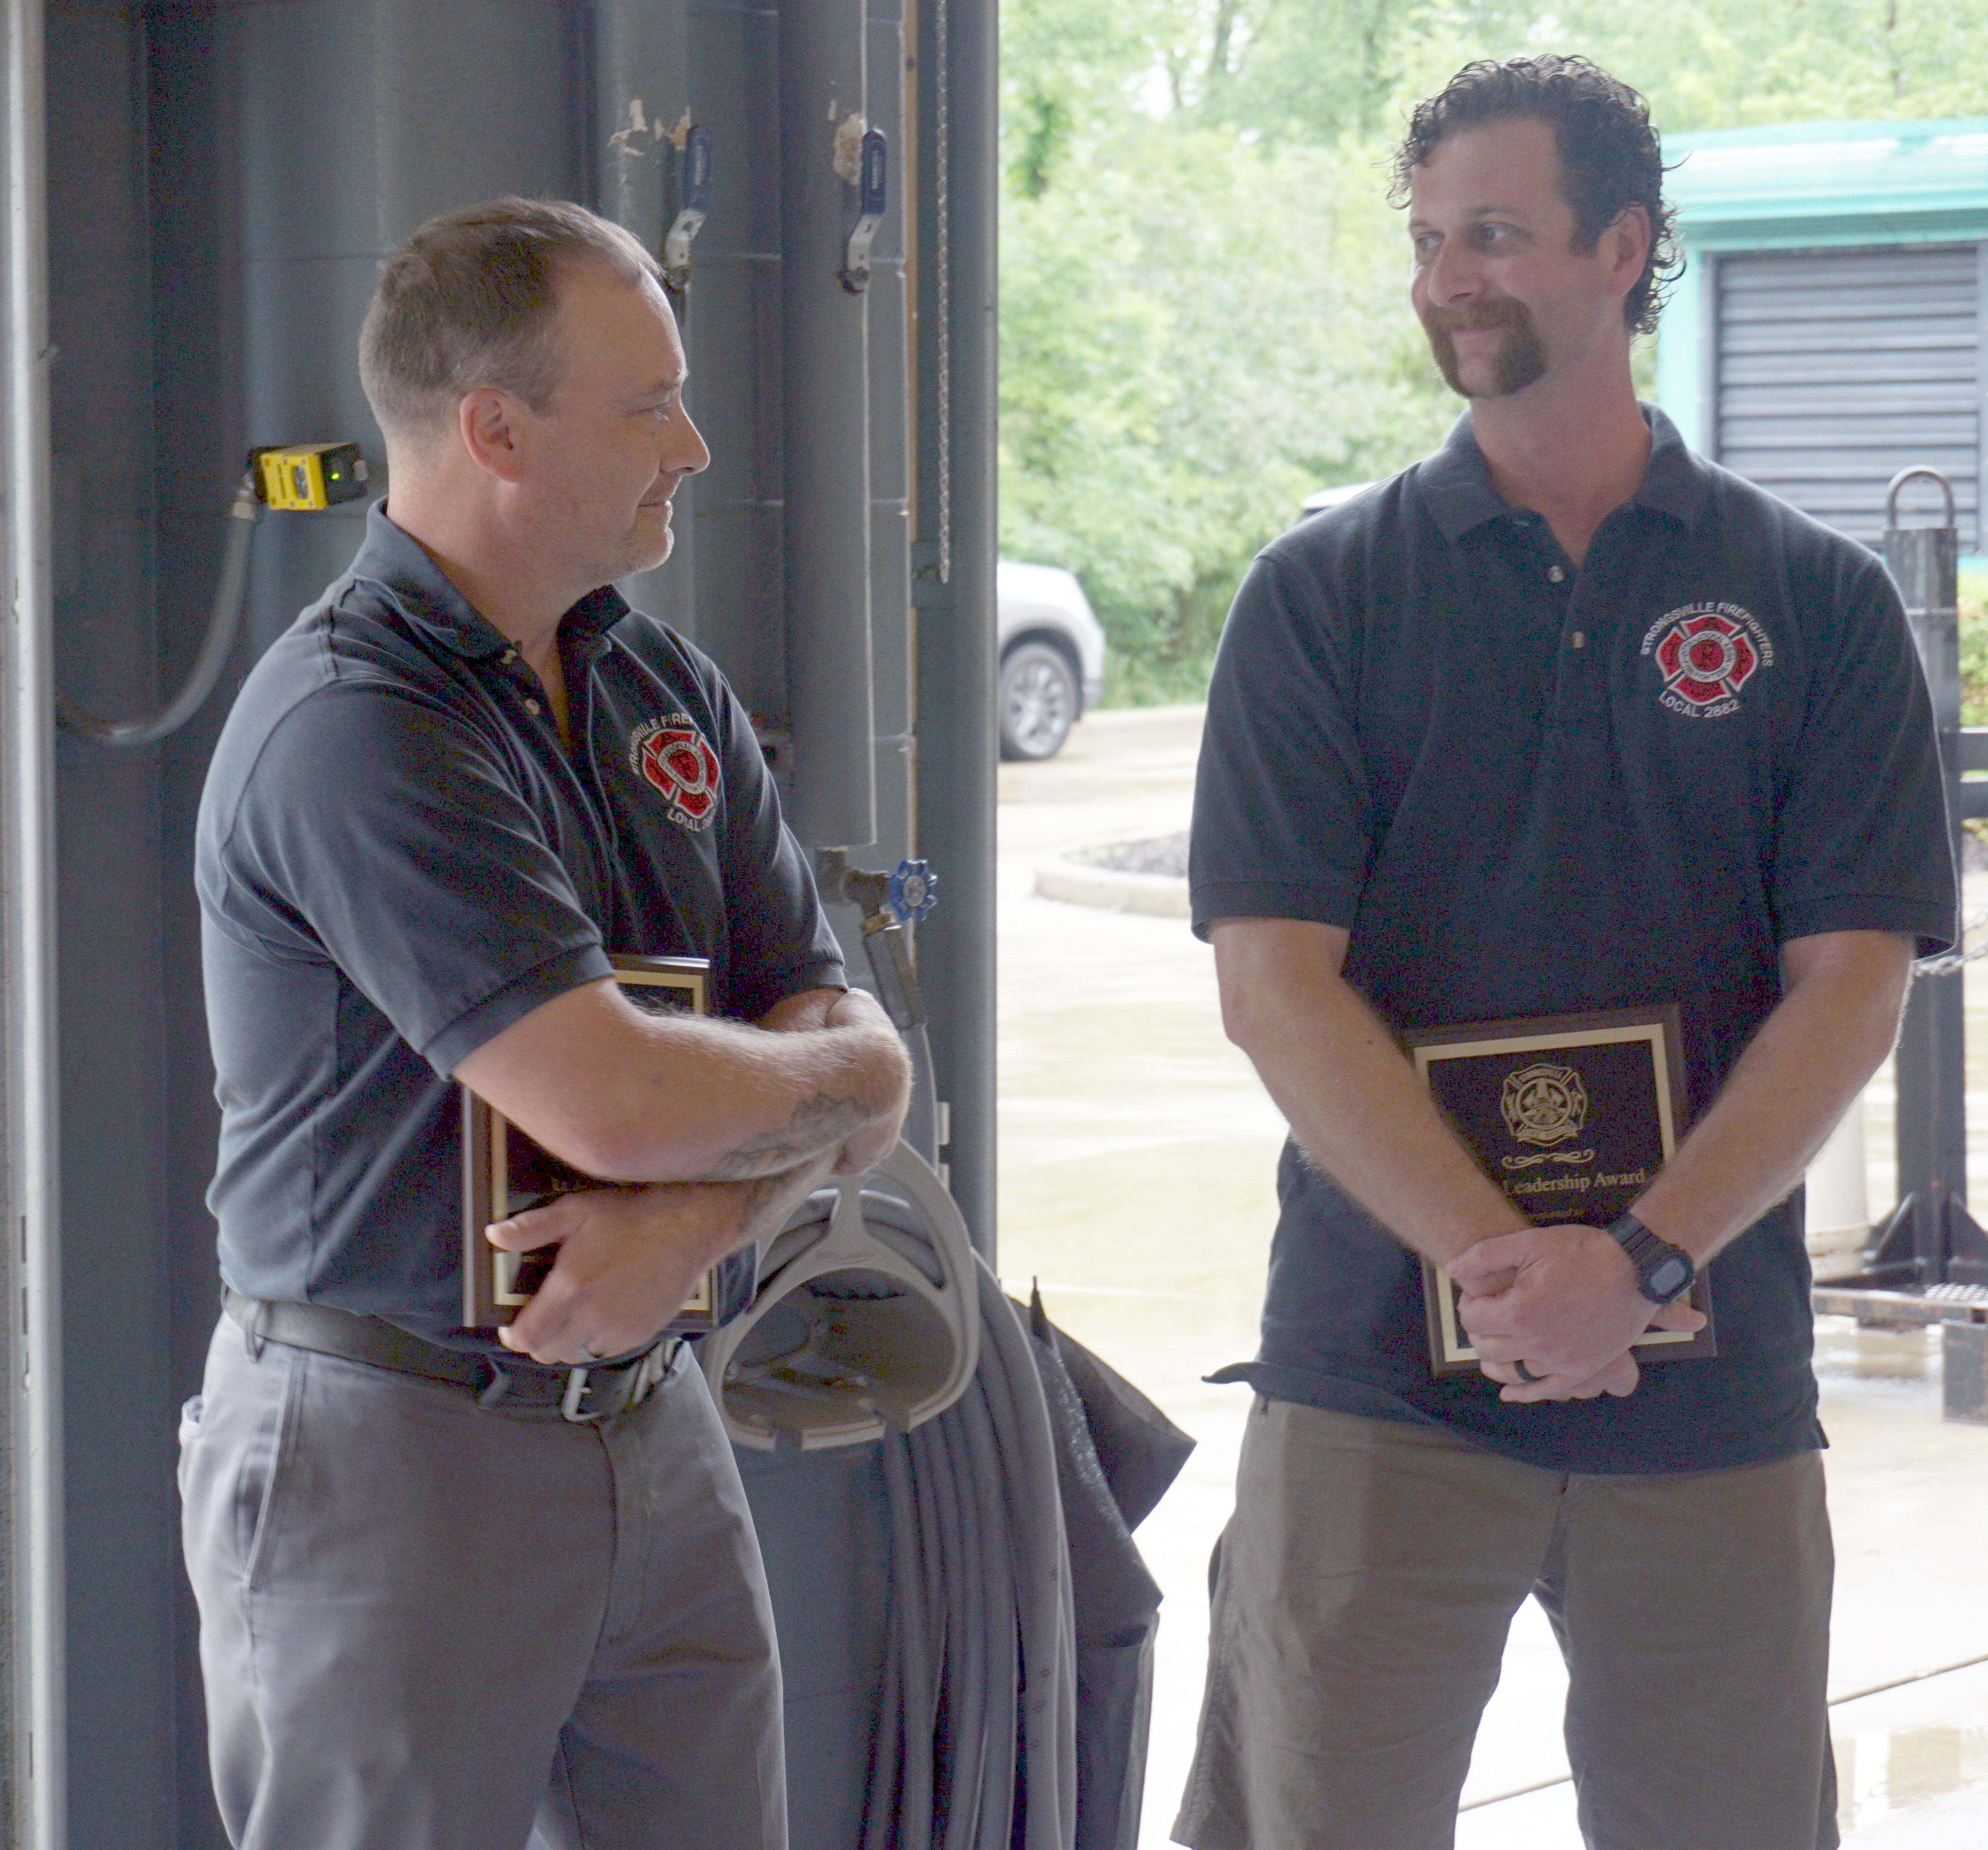 Smeader is Firefighter of the Year 